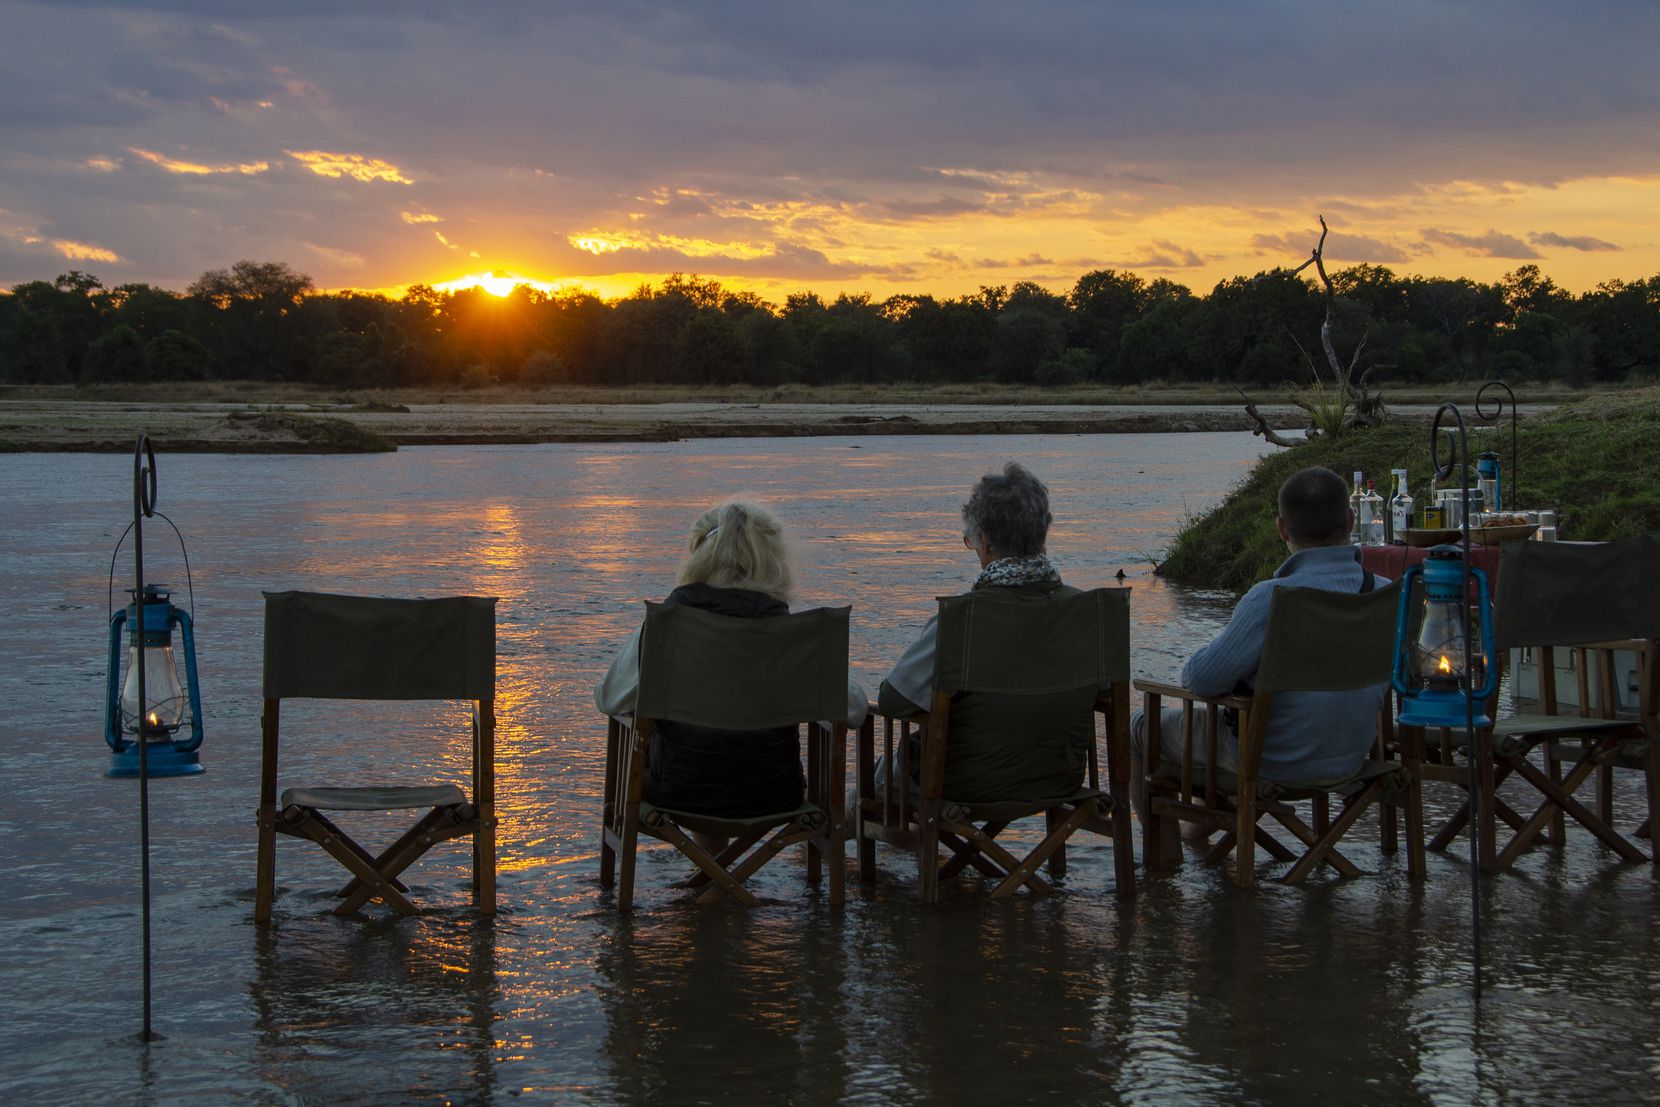 Visitors watch the sunset over the Kapamba River in Zambia's South Luangwa National Park.